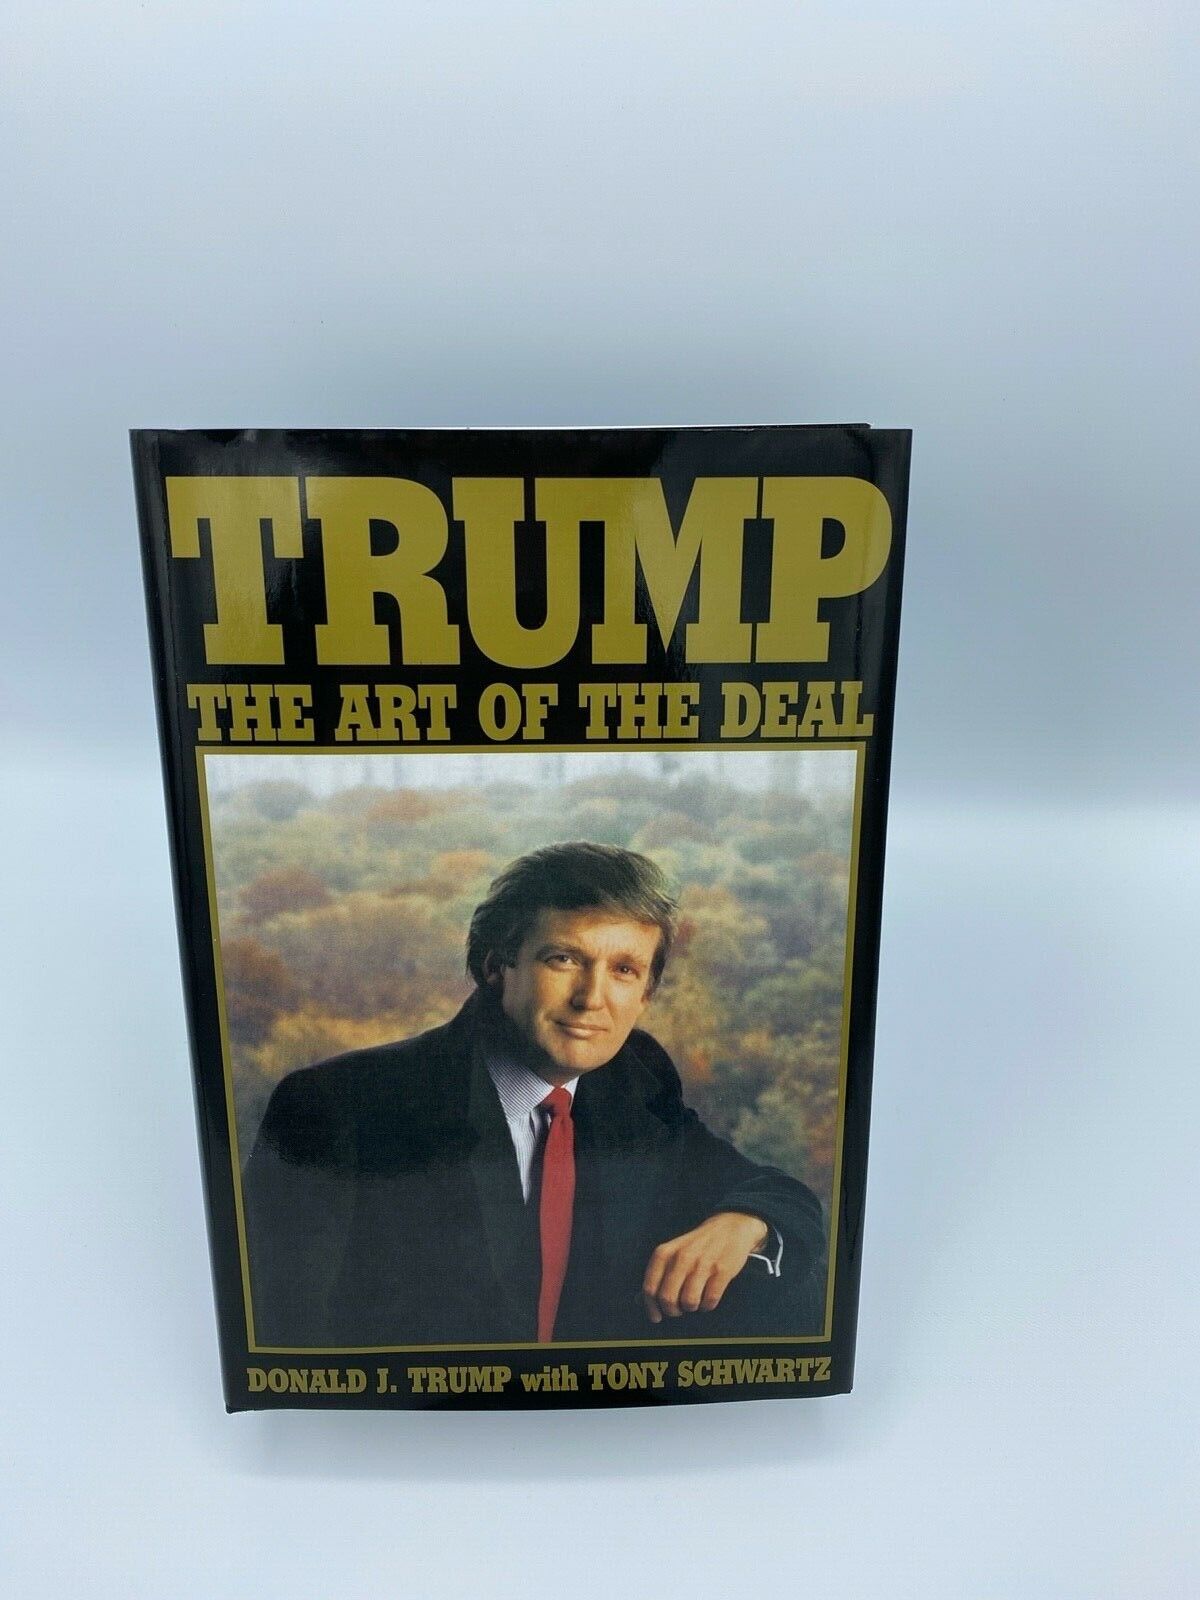 rare 1987 Trump : The Art of the Deal by Donald J. Trump and Tony Schwartz  Без бренда